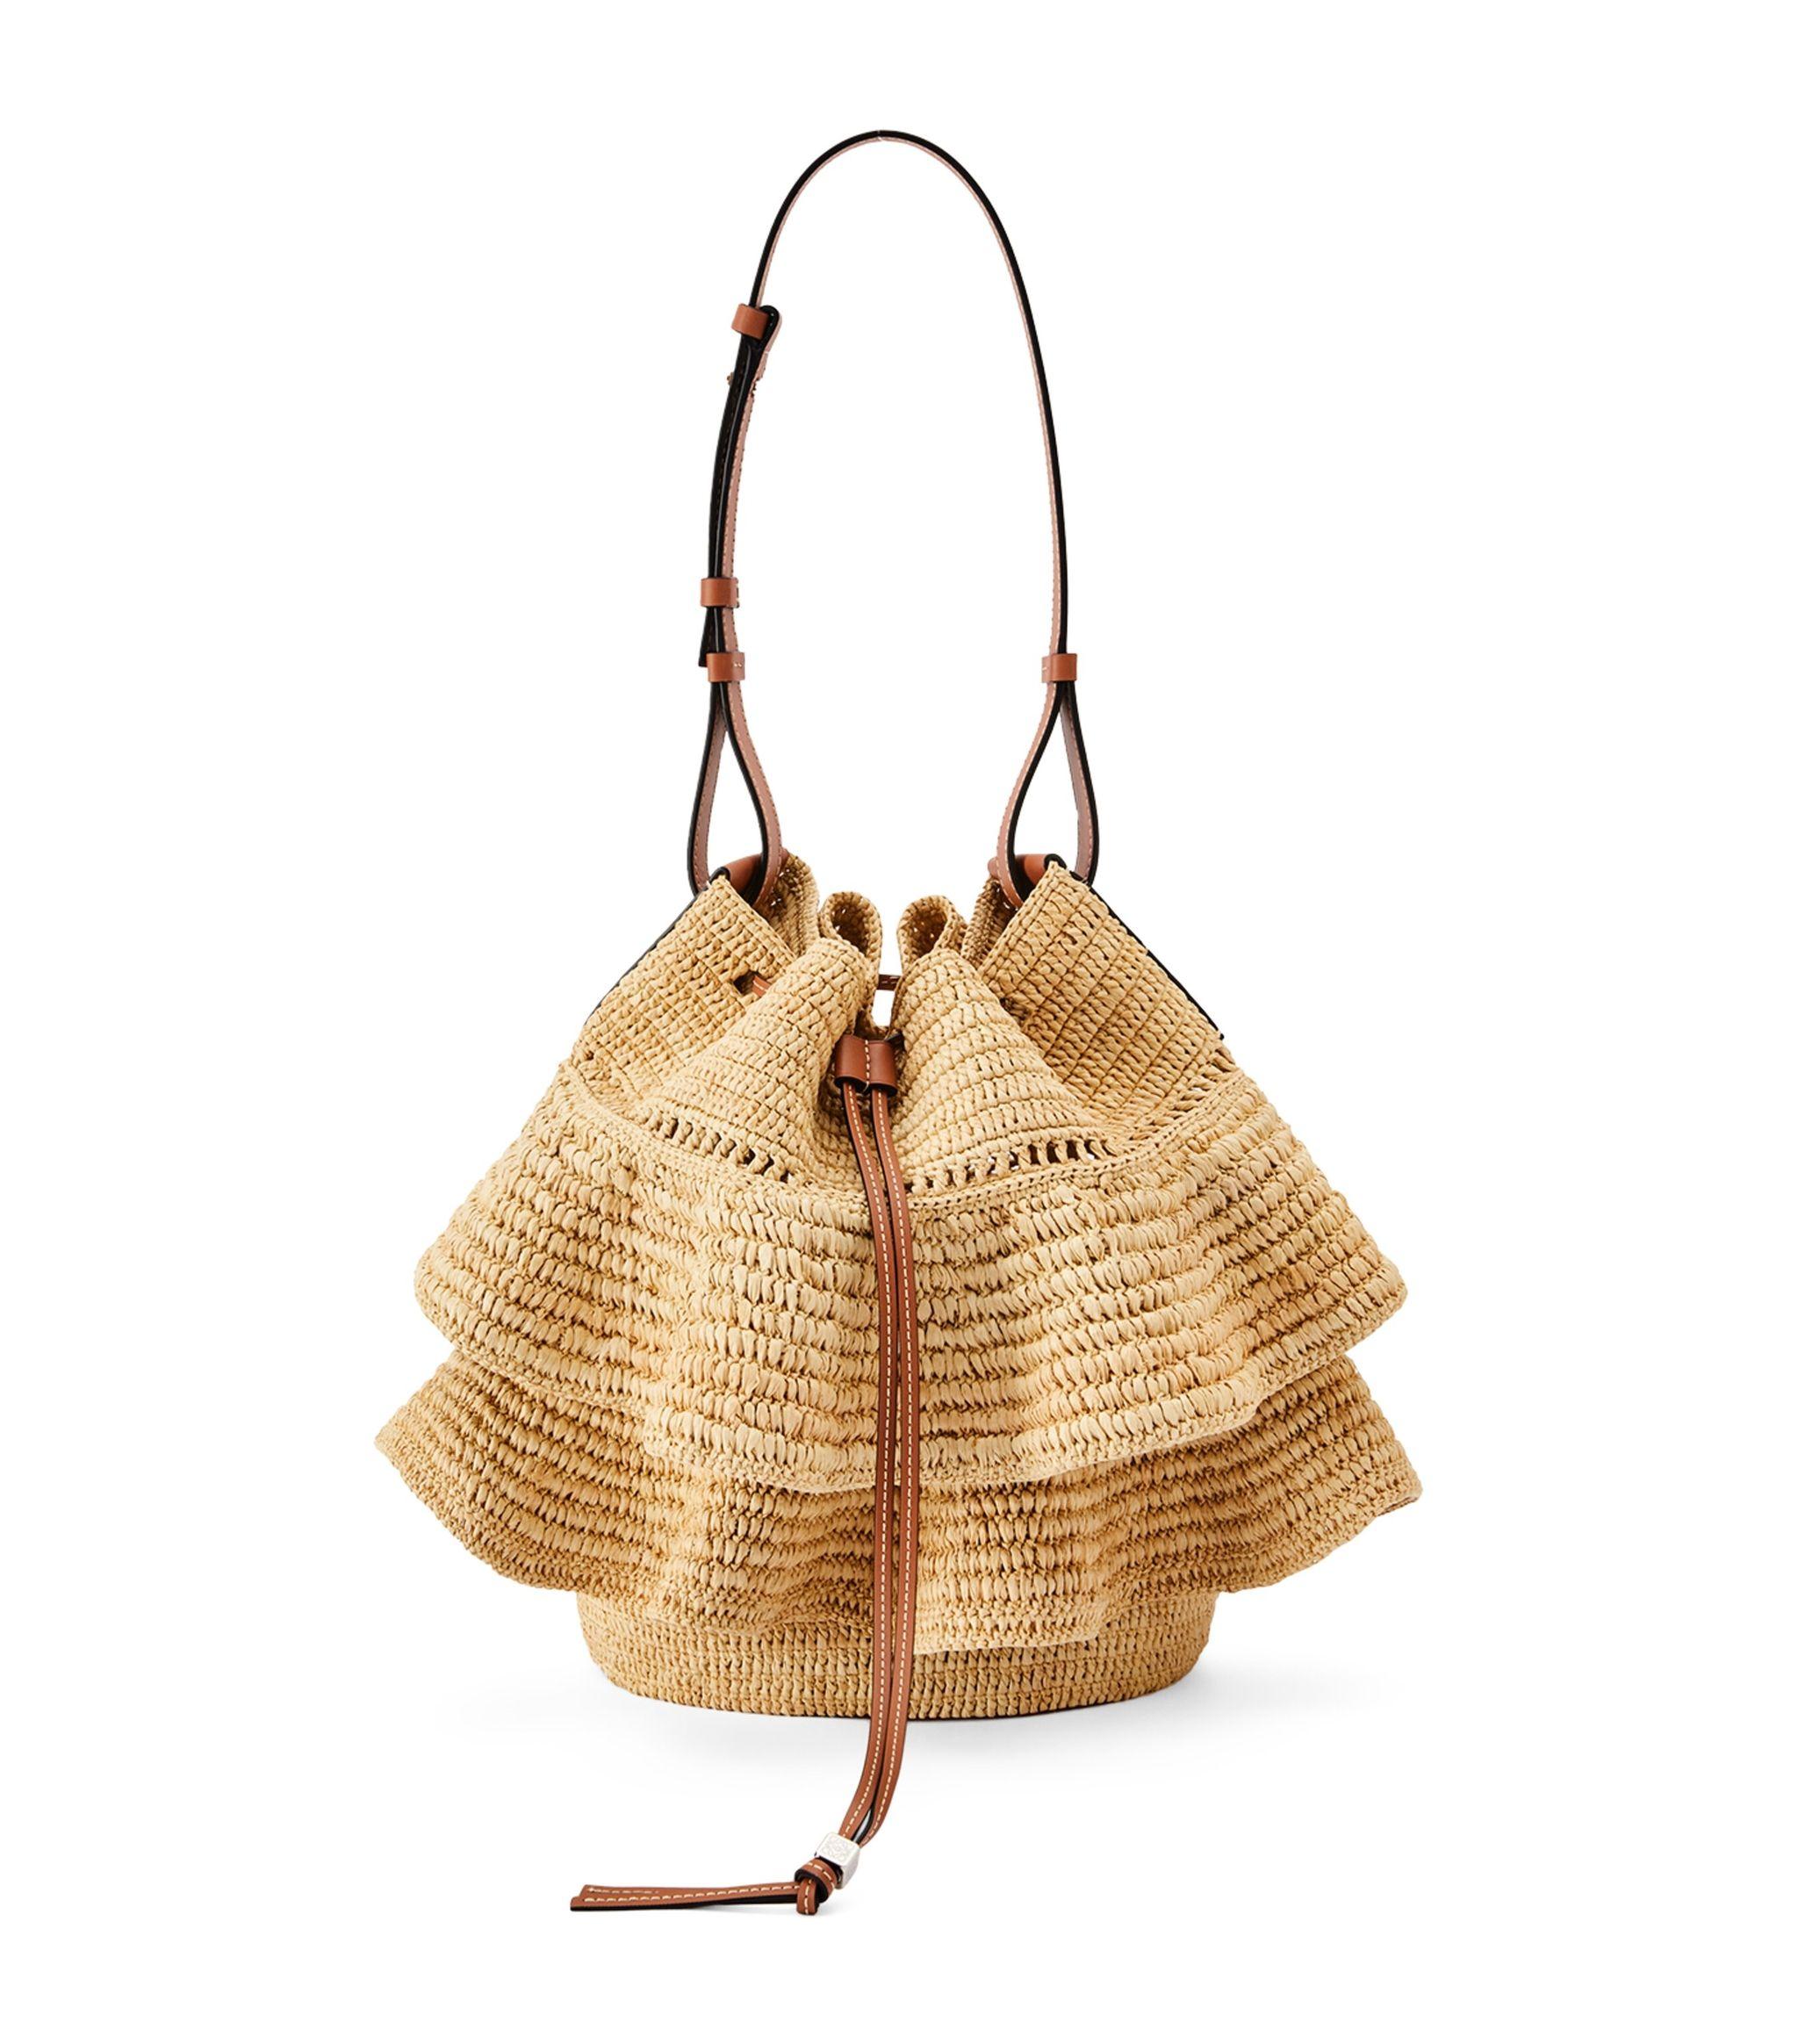 Details more than 71 loewe straw bags - in.cdgdbentre